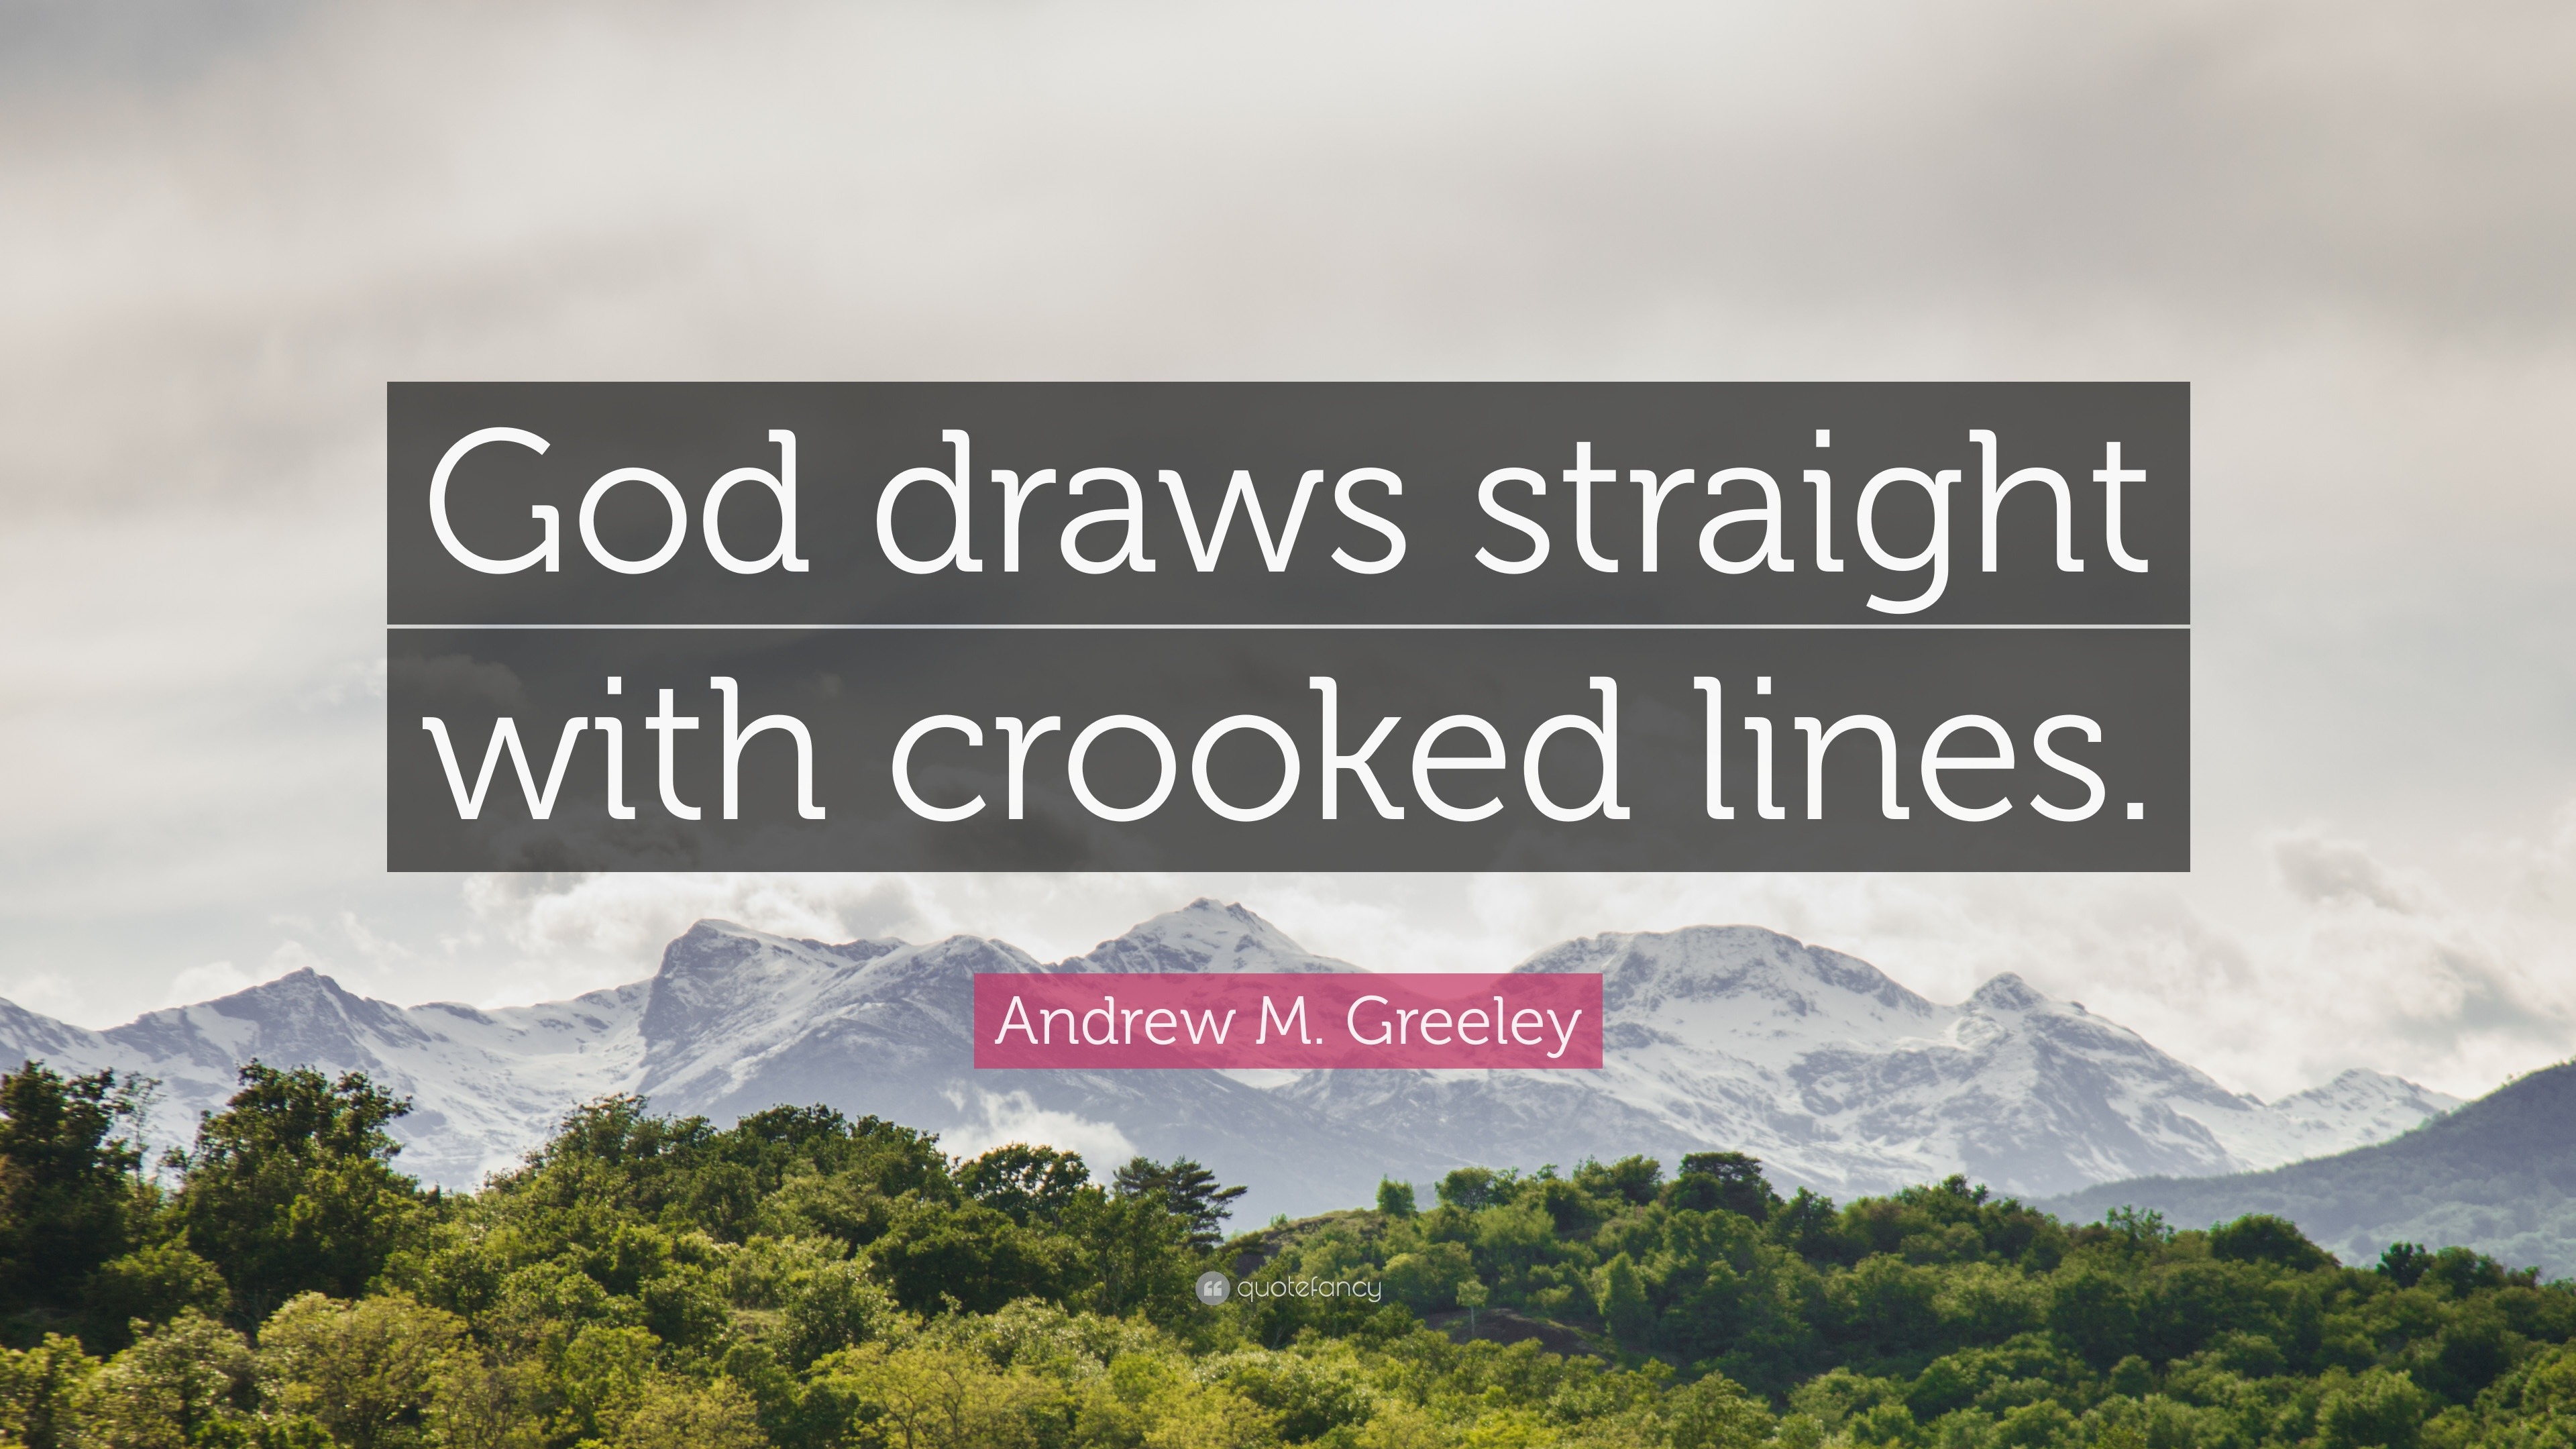 Andrew M. Greeley Quote “God draws straight with crooked lines.”